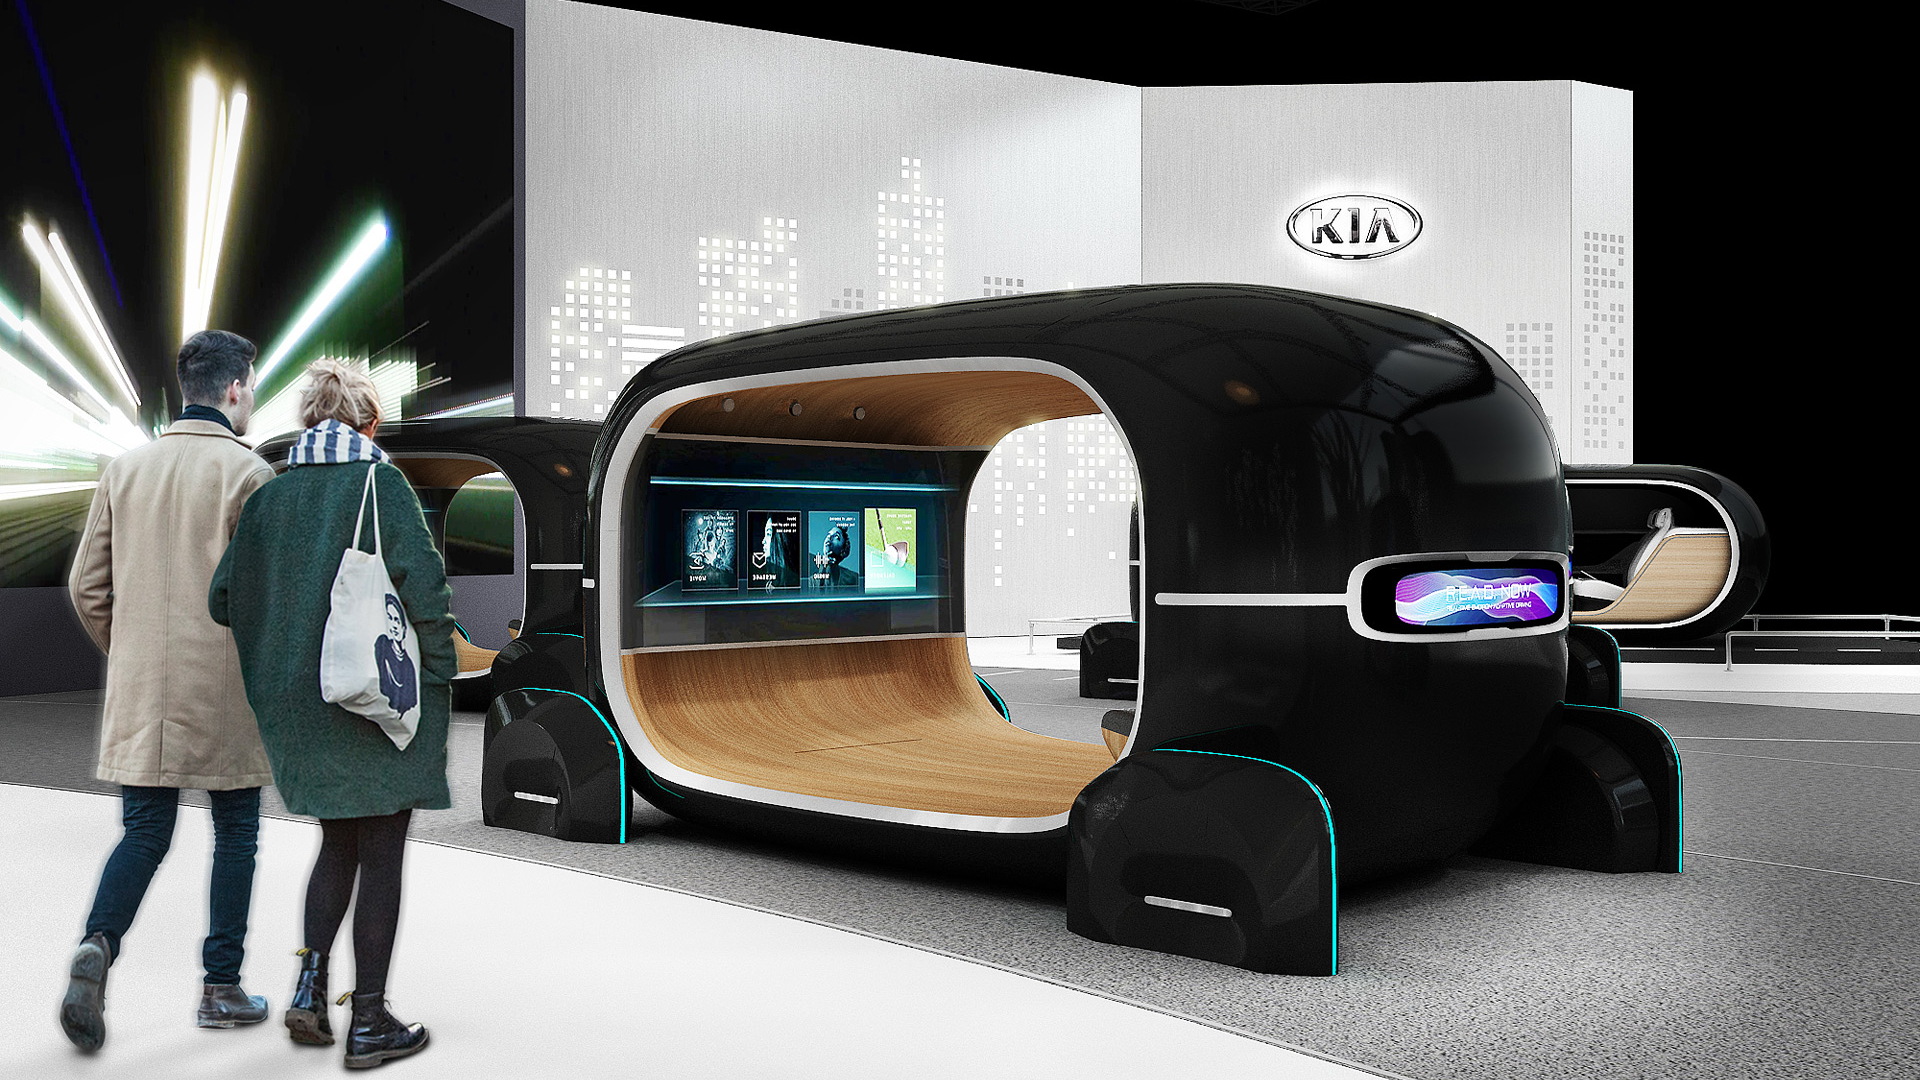 Kia READ (Real-time Emotion Adaptive Driving) concept debuting at 2019 CES